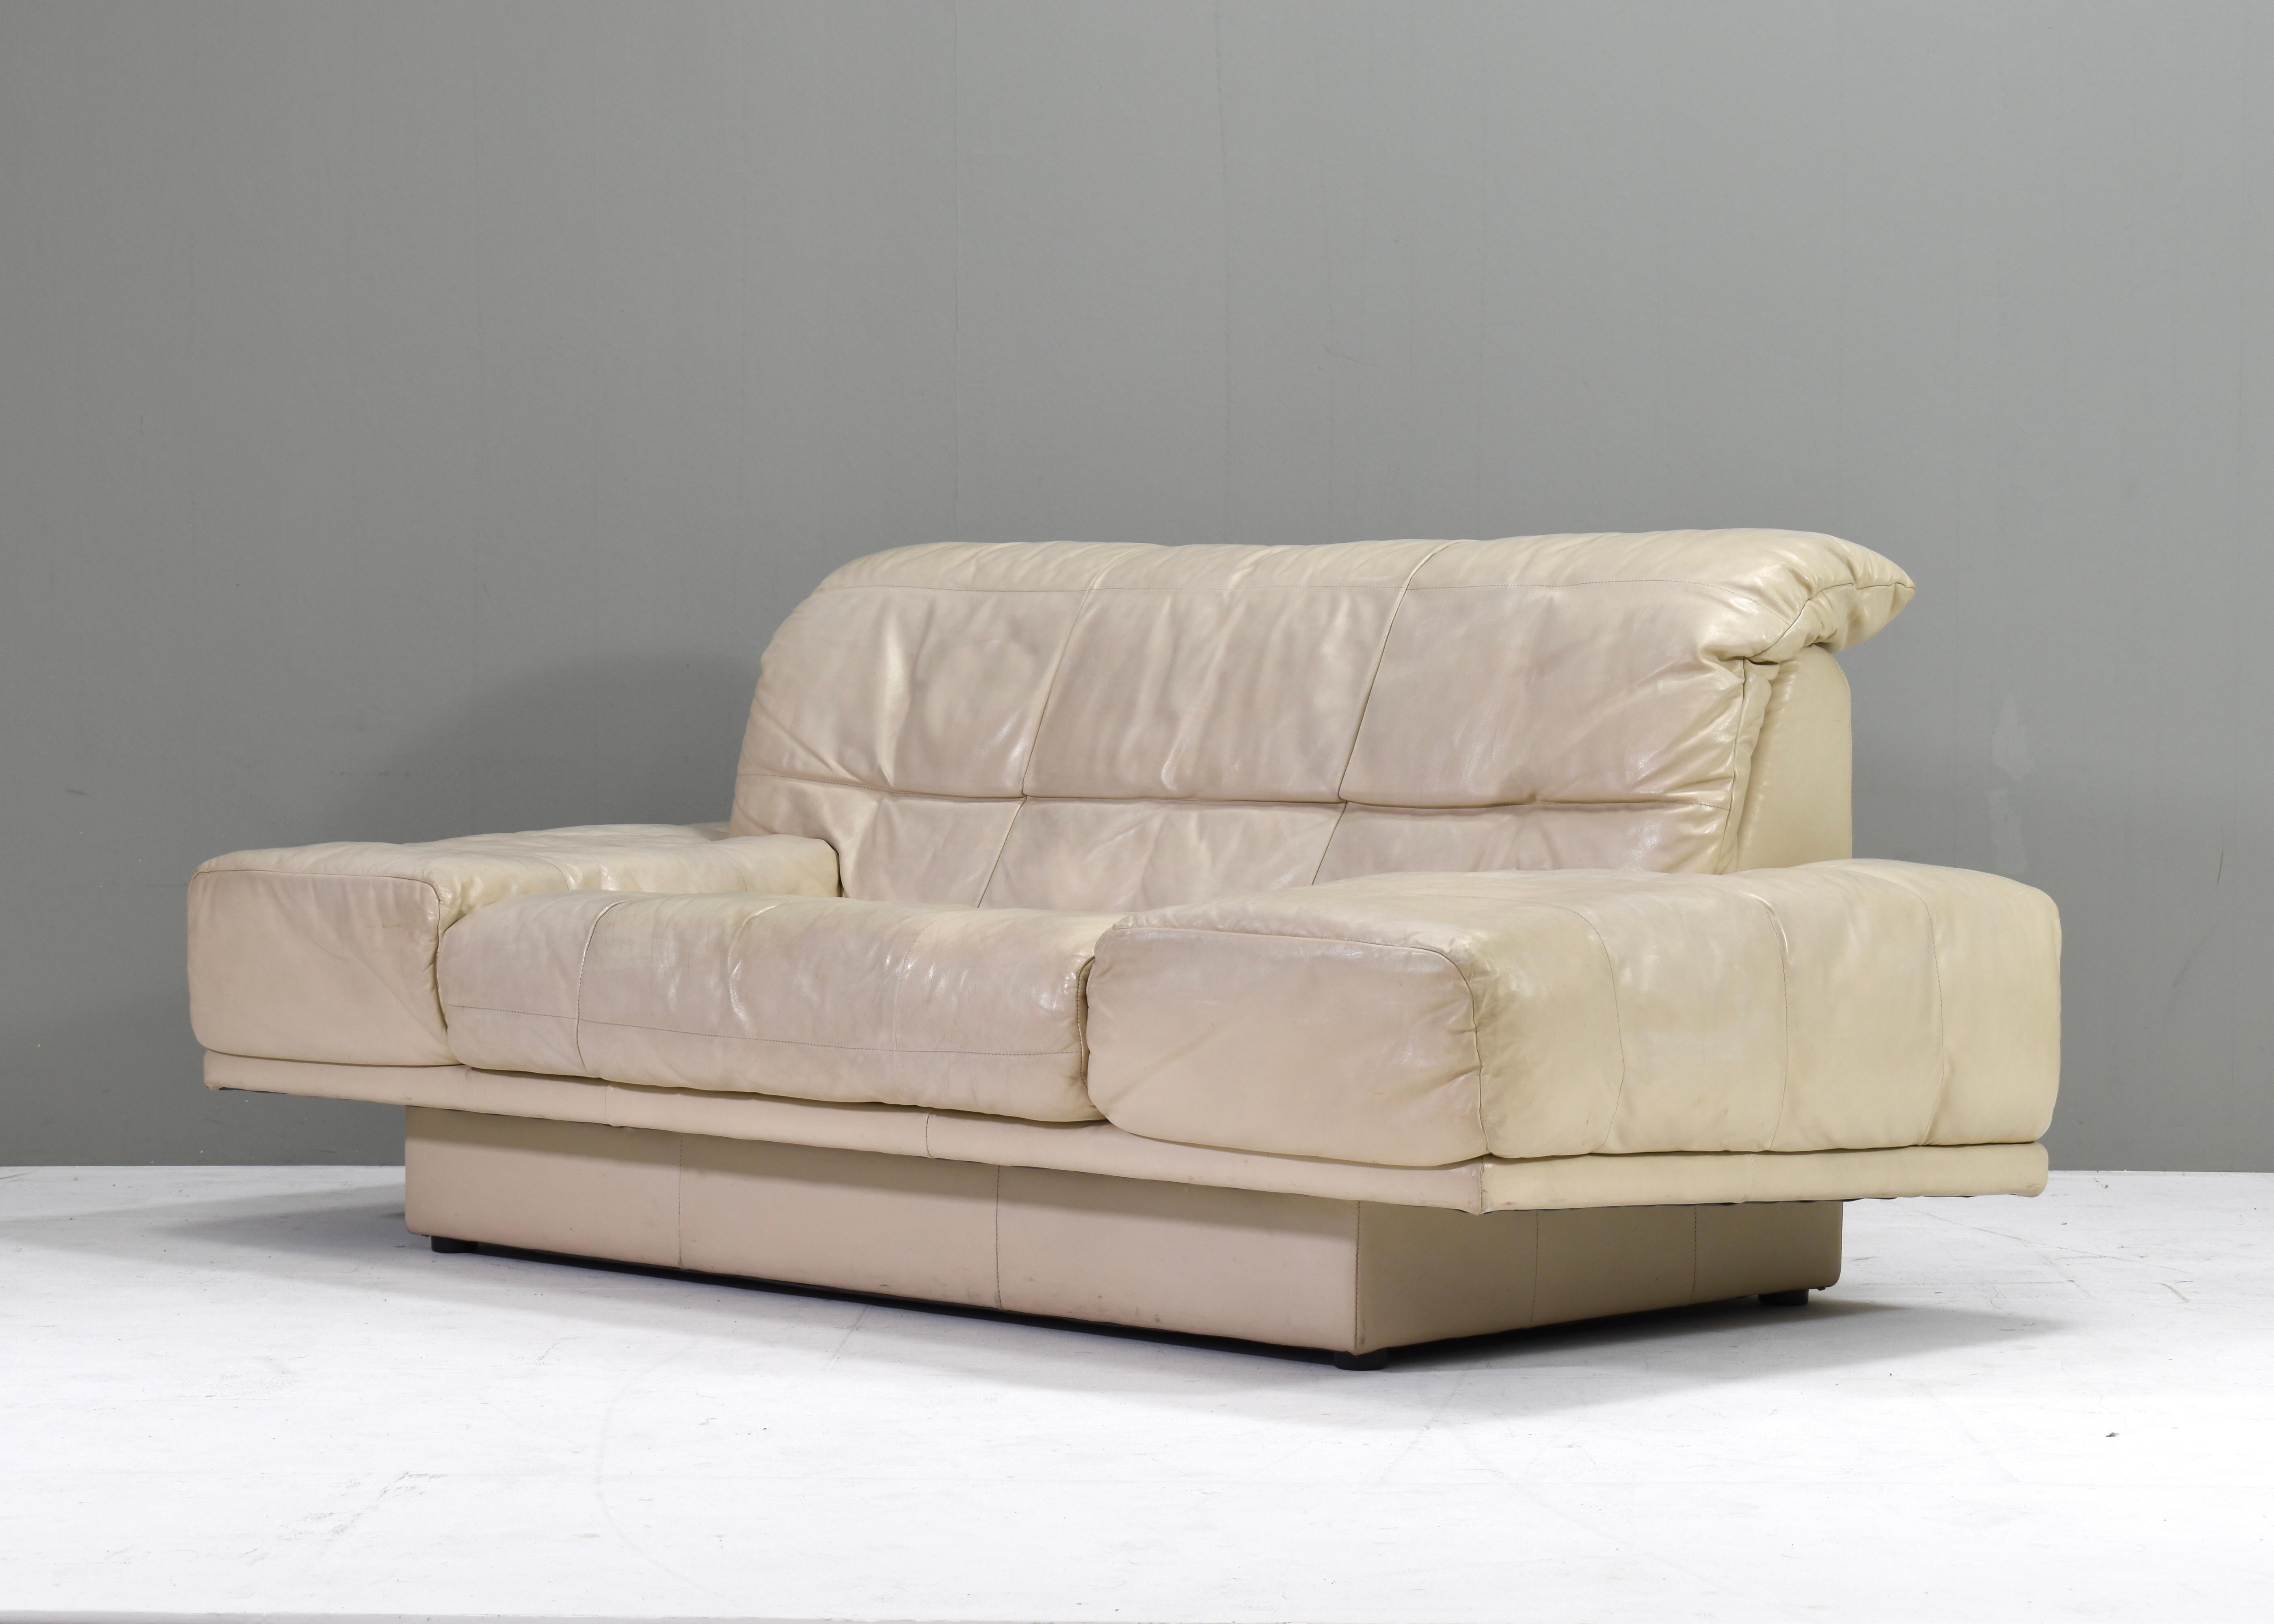 Pair of Rolf Benz sofa’s 2-seat and 3-seat – Germany, circa 1980-1990 For Sale 7